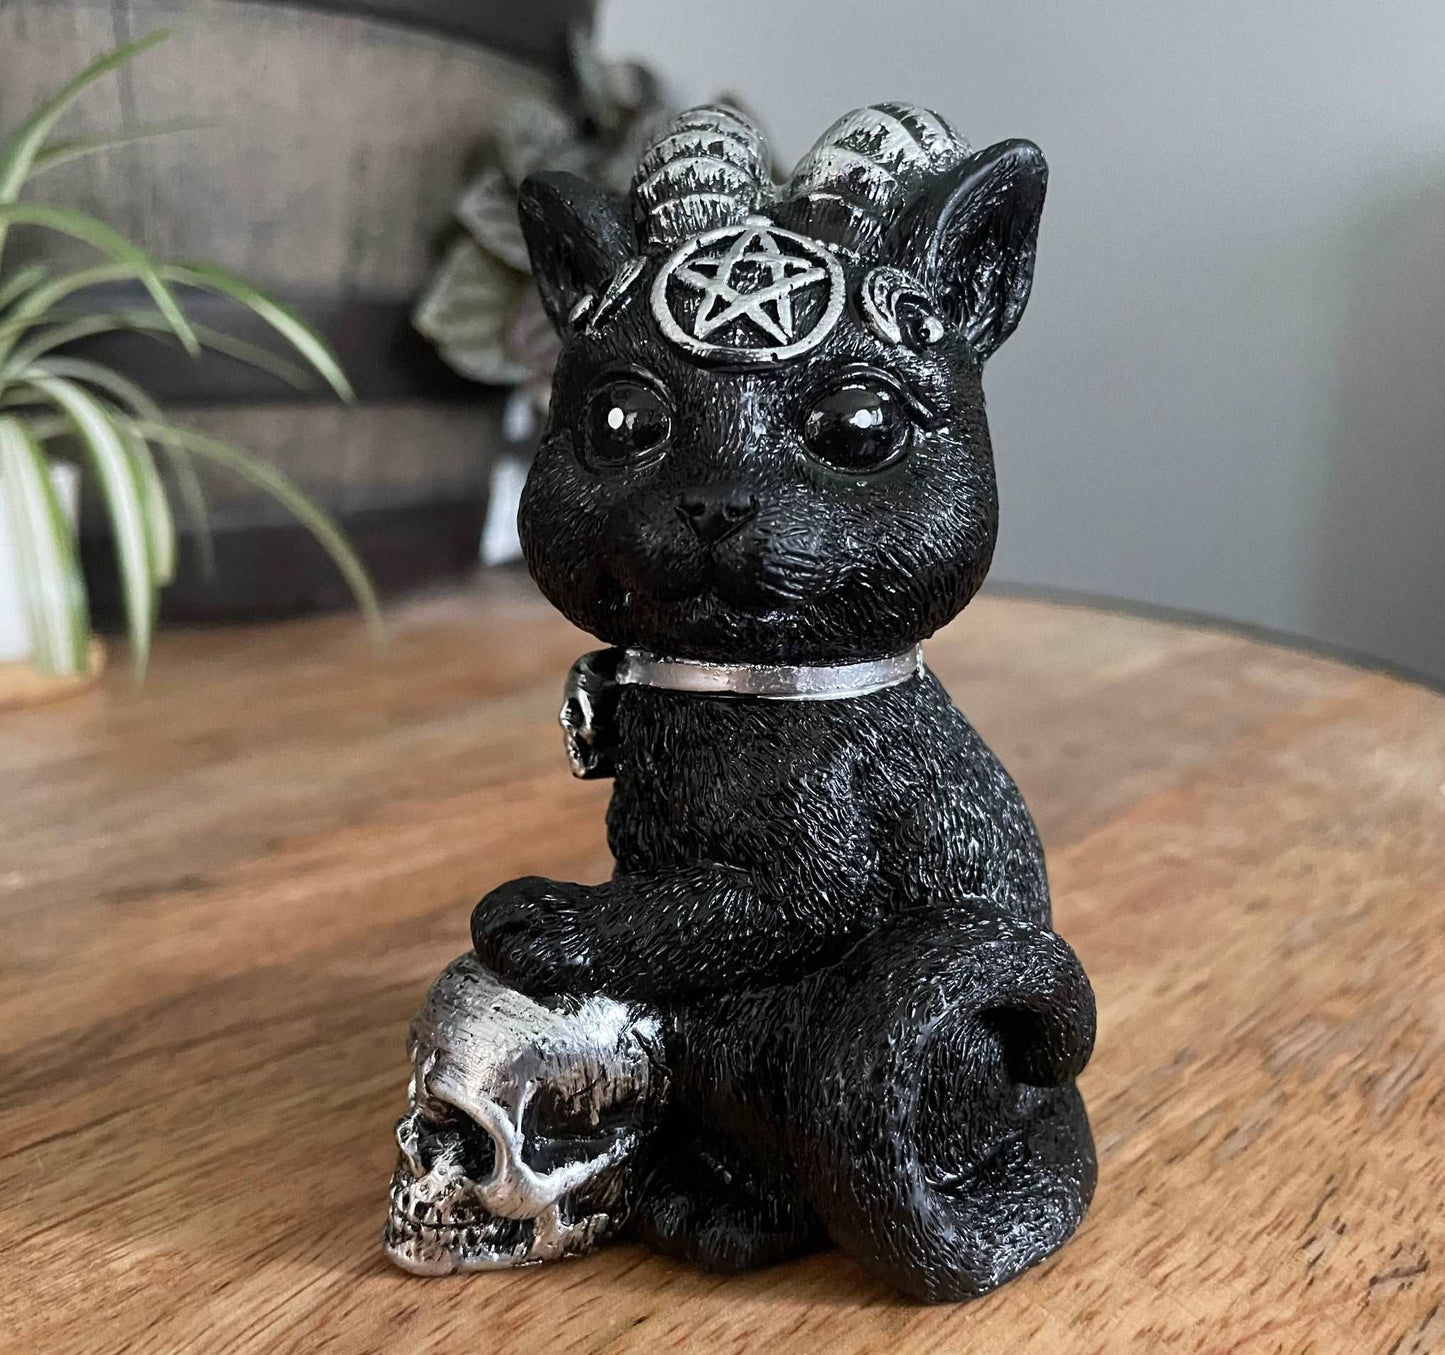 Pictured is a resin statue of a black cat with horns and a pentagram on its forehead with a paw on a silver skull.